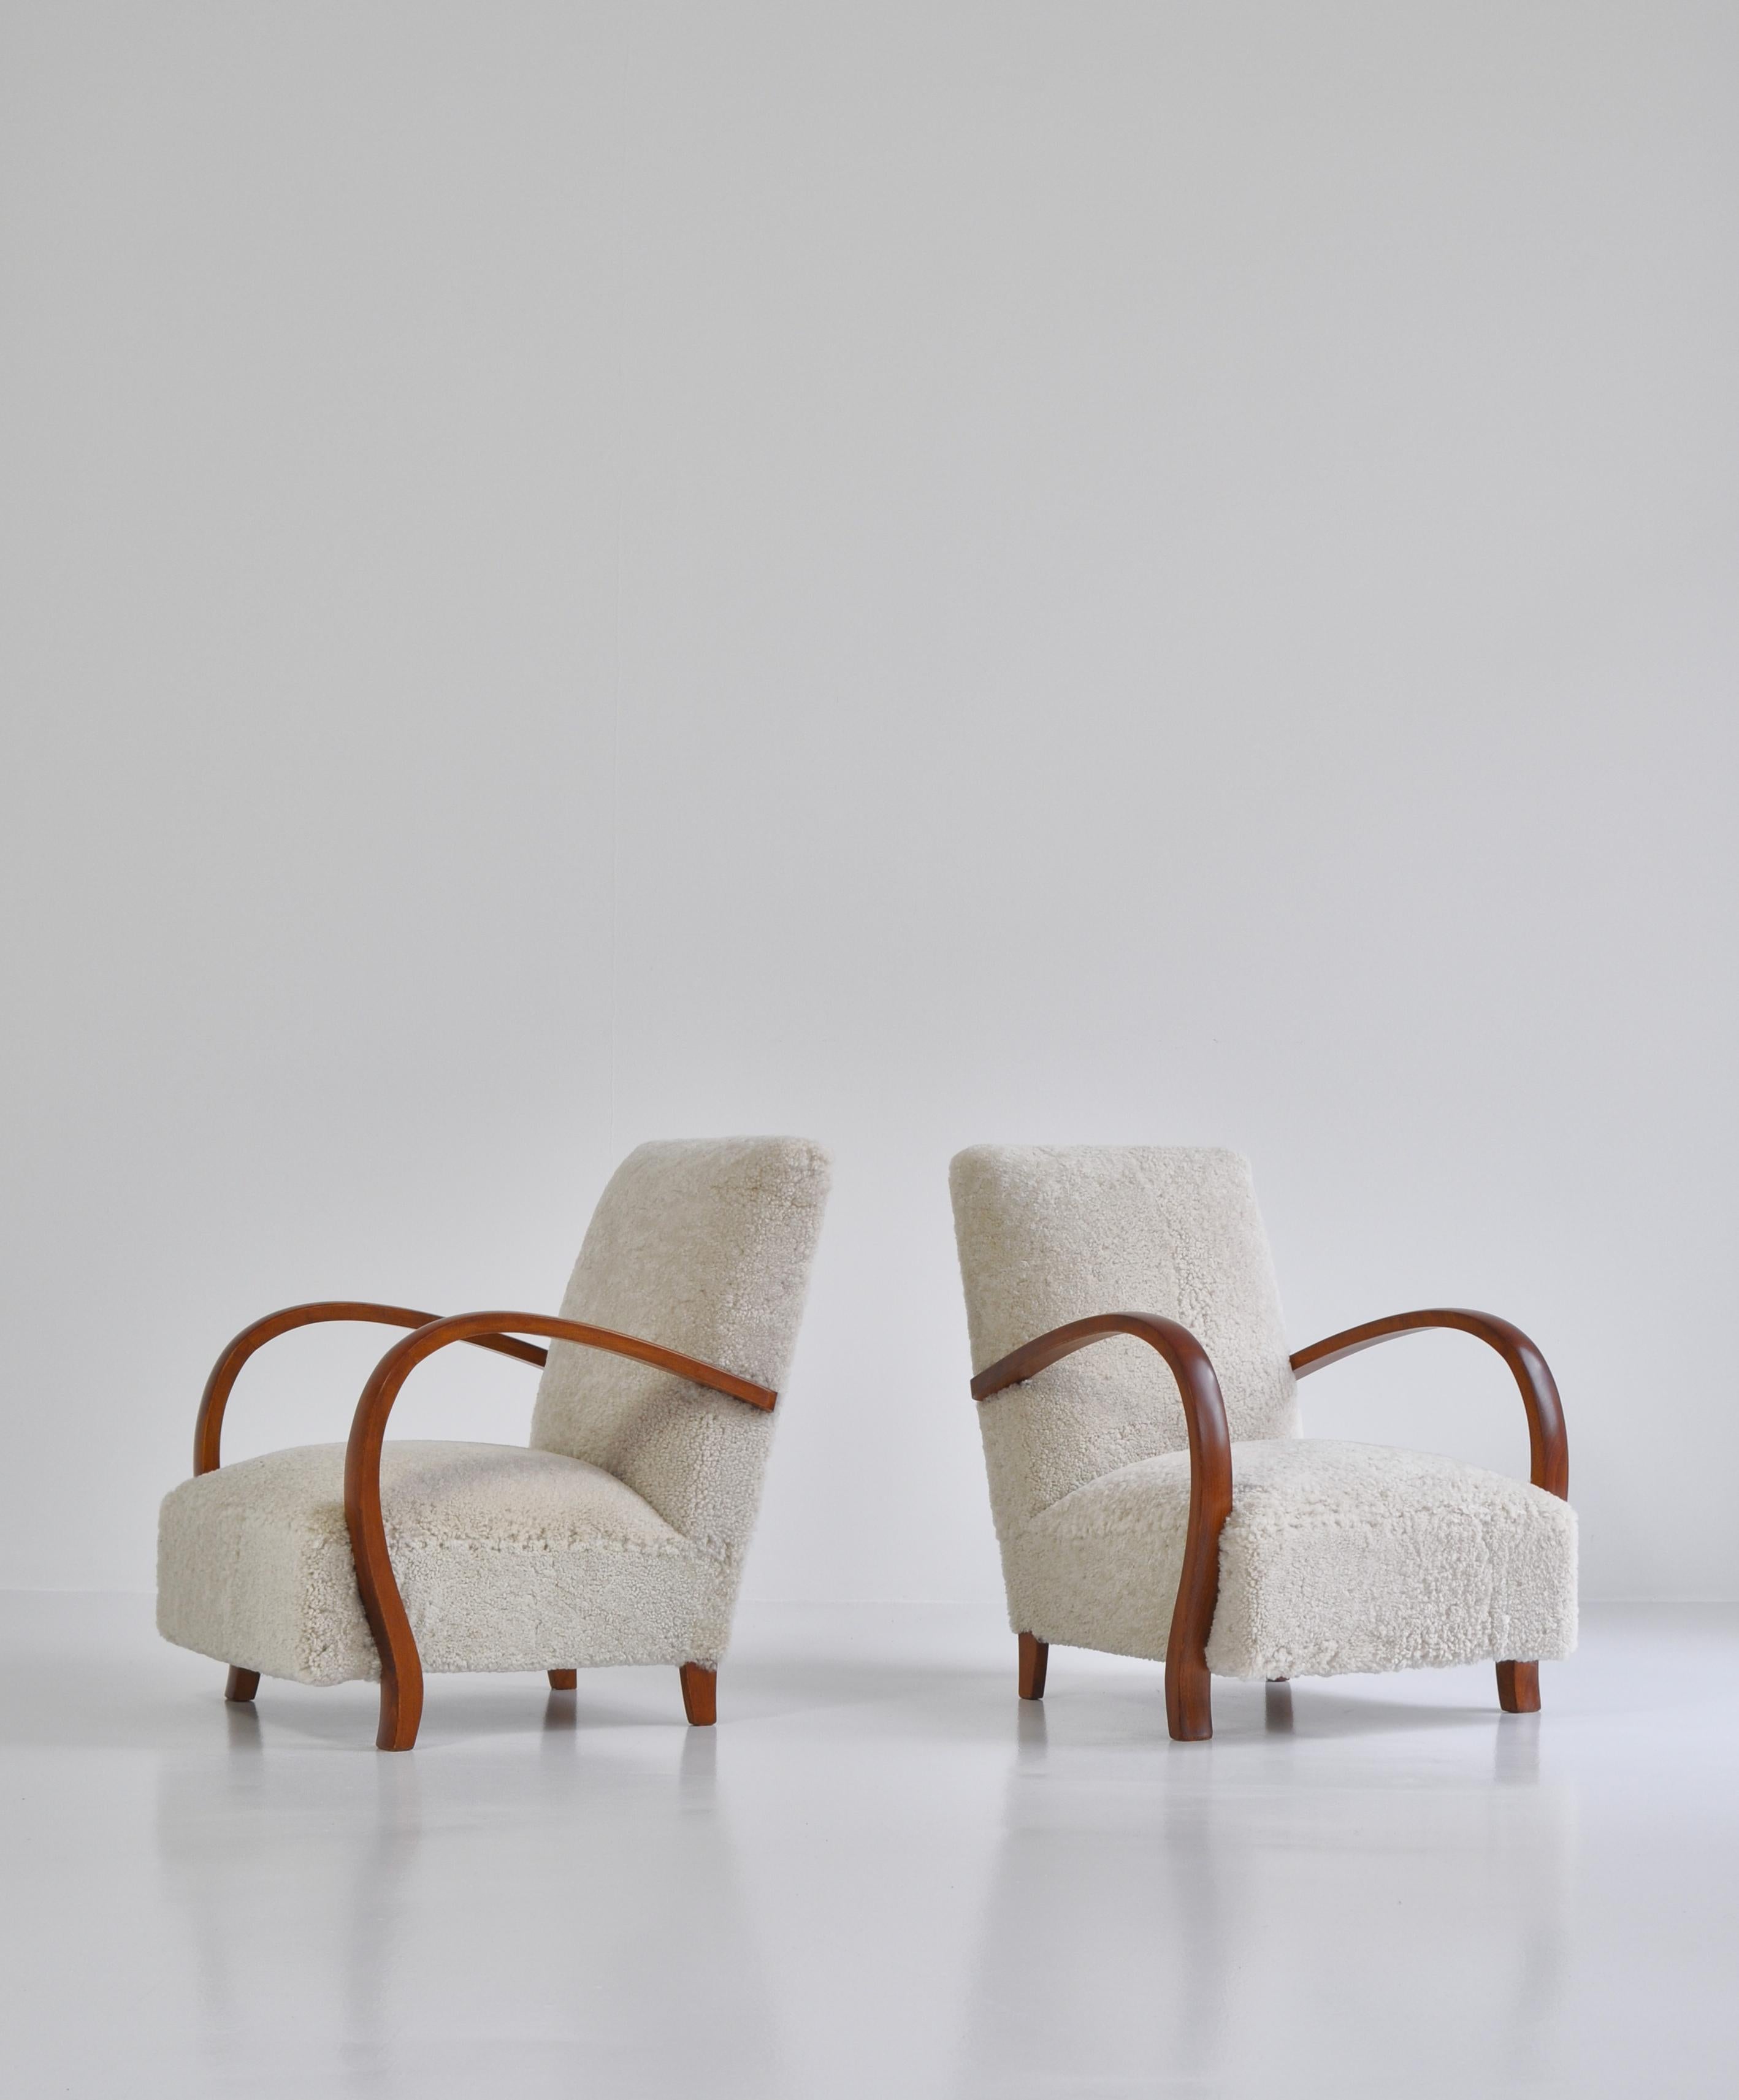 Danish Art Deco Lounge Chairs in White Sheepskin and Stained Beech, Denmark, 1930s